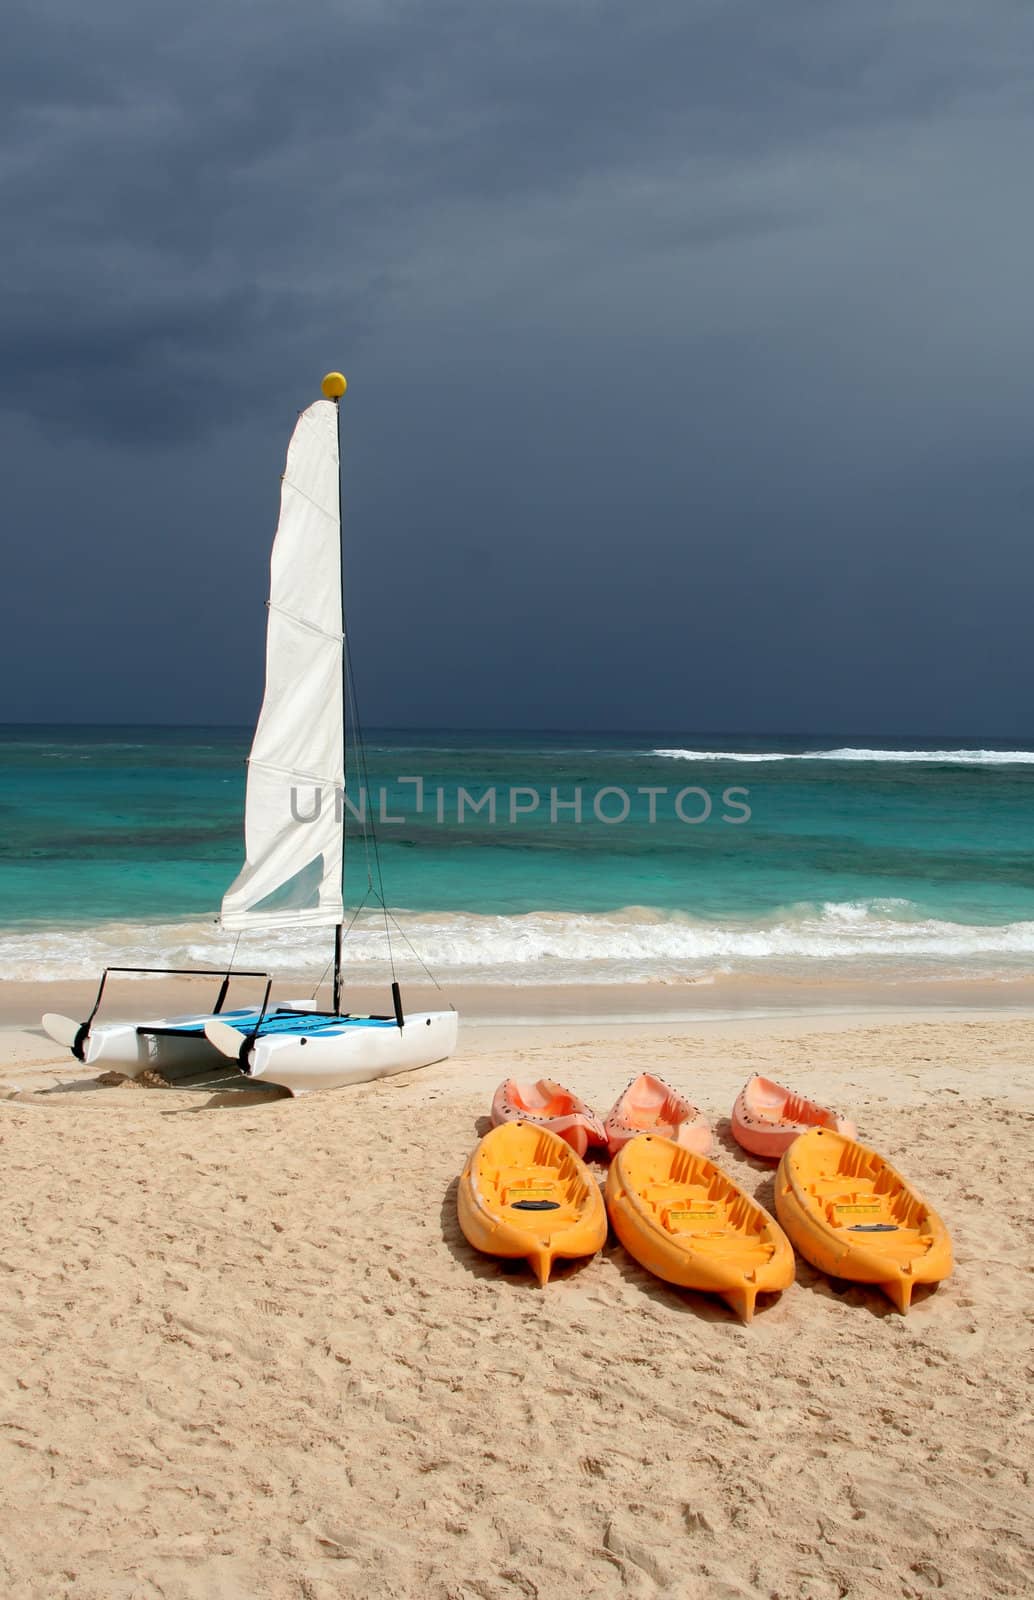 A catamaran and six plastic canoes sitting on shore at the beach.